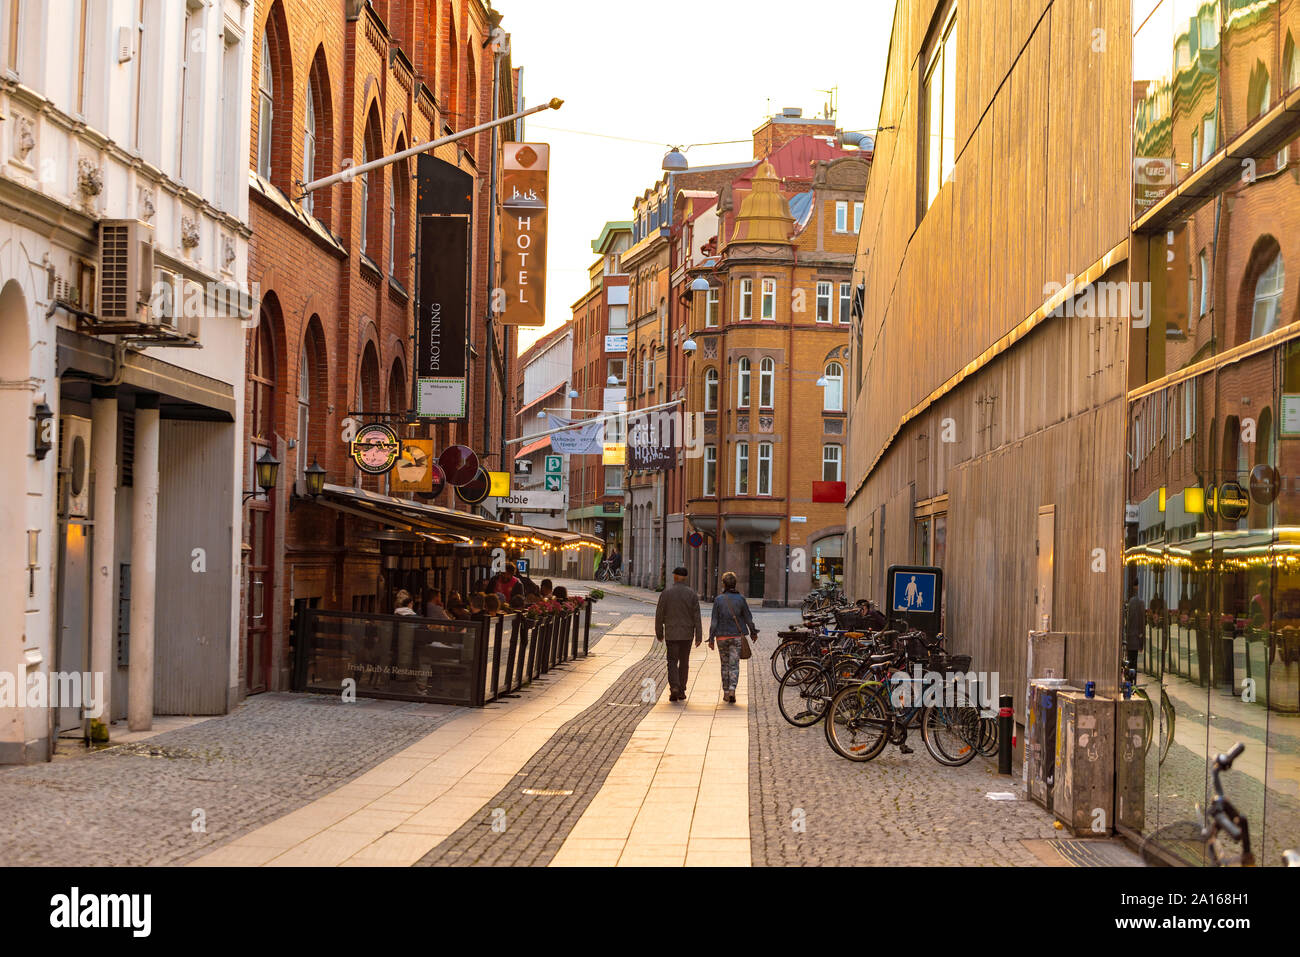 Rear view of people walking on street amidst residential buildings in Malmo city Stock Photo